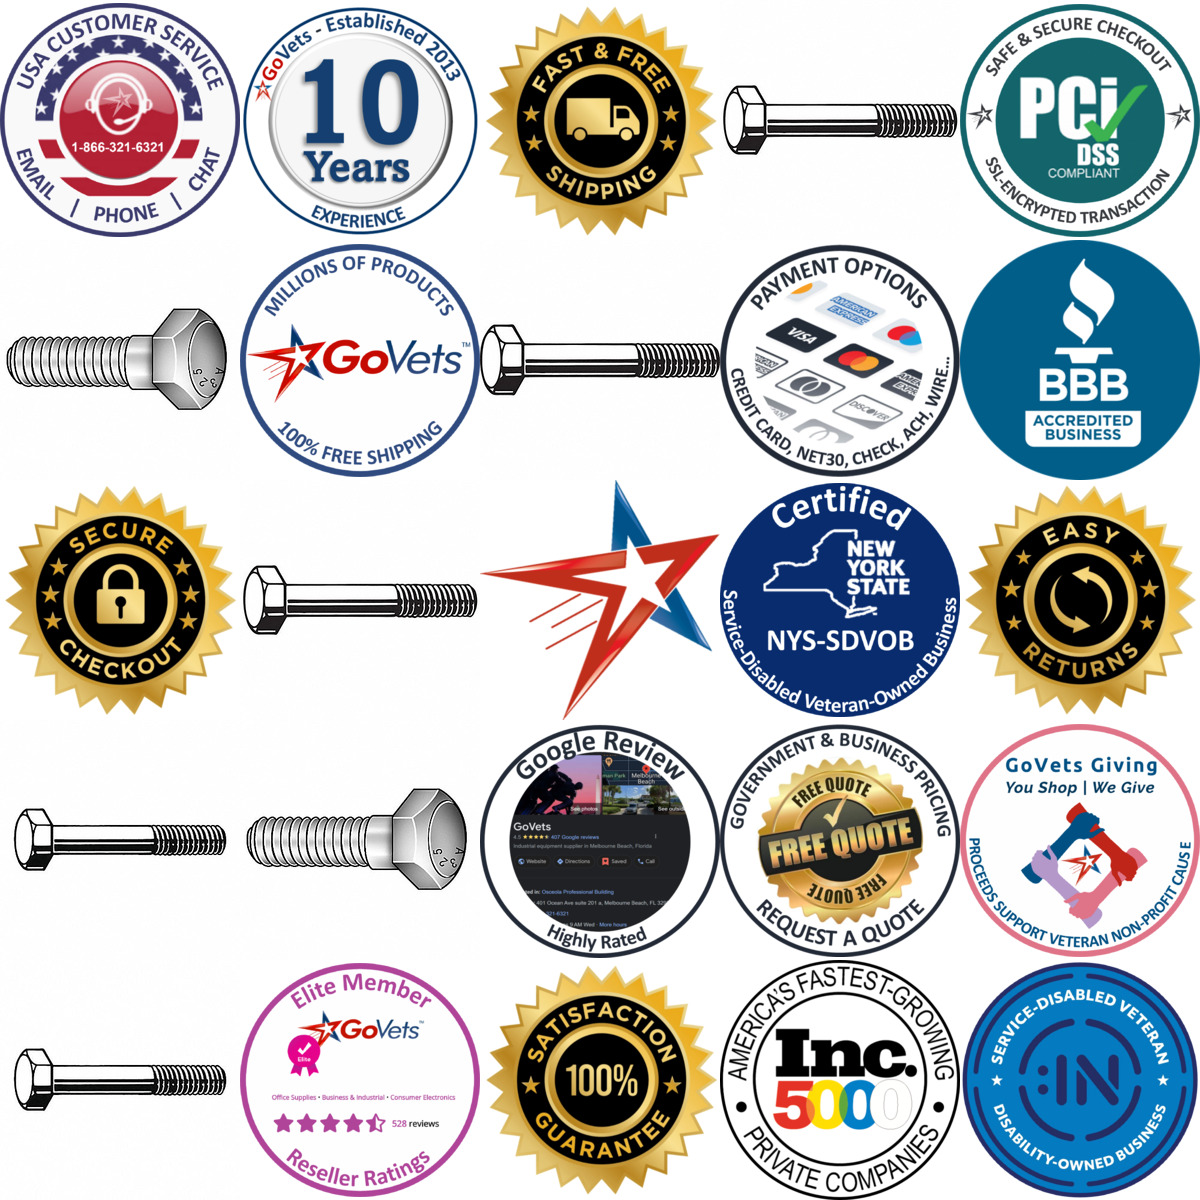 A selection of Structural Bolts products on GoVets